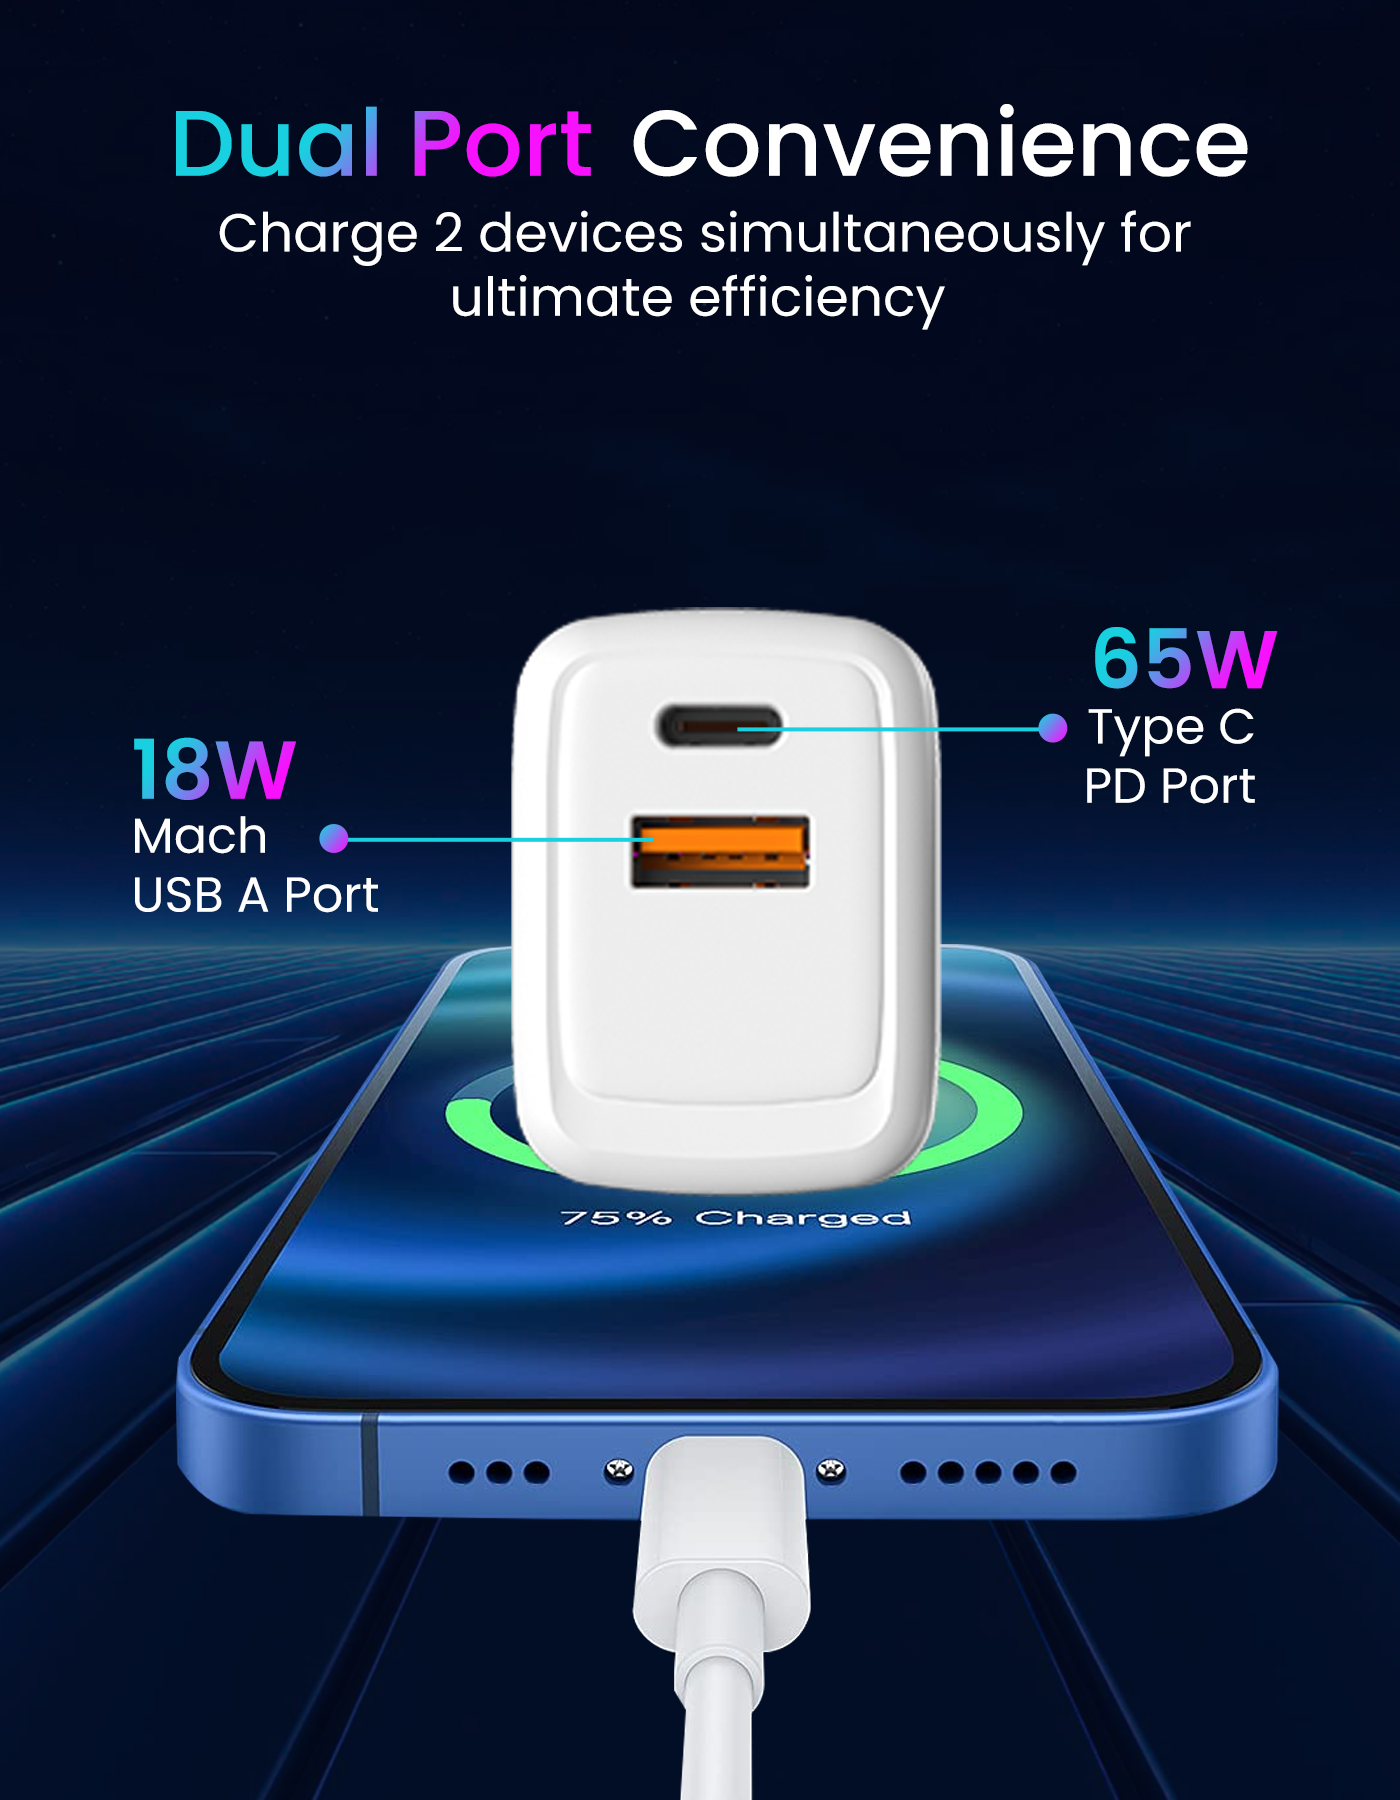 Portronics Adapto 65 Plus 65w Gan Power Adapter fast wall charger with dual ports